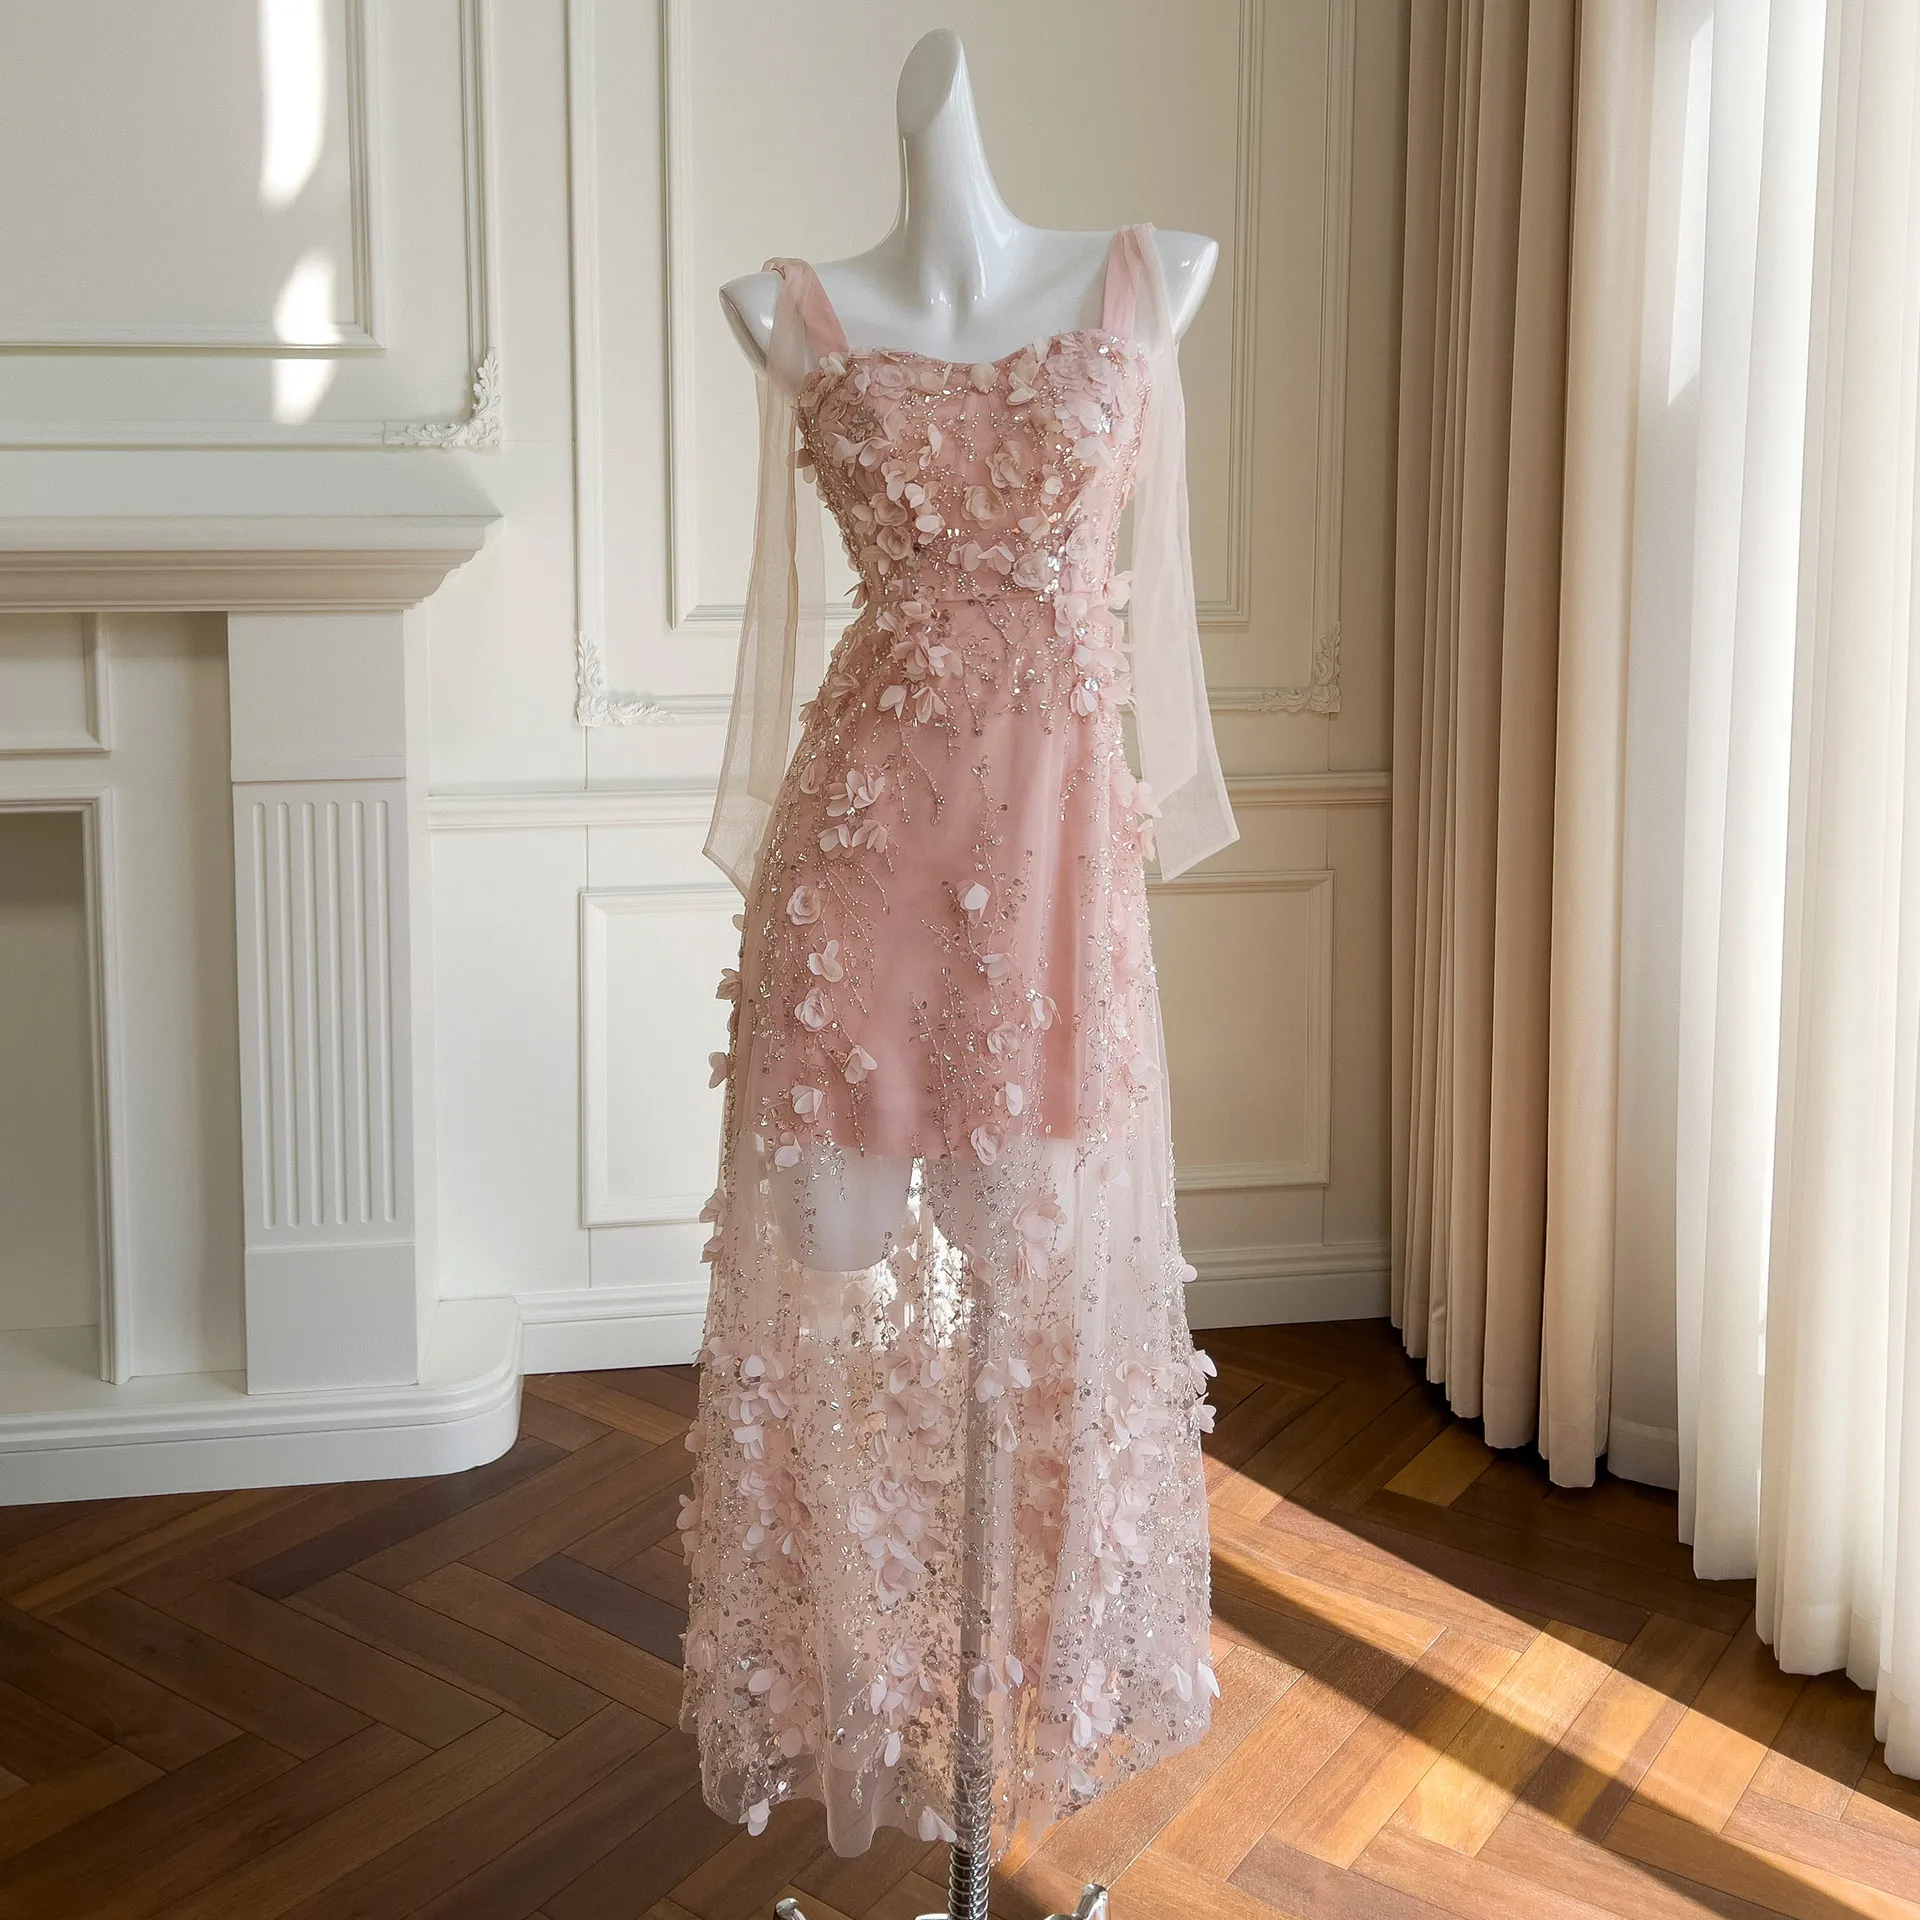 Celebrity style, elegant temperament, lace up, pink and tender age reducing formal dress, waist up, slimming off, can be worn on vacation dates at 68450